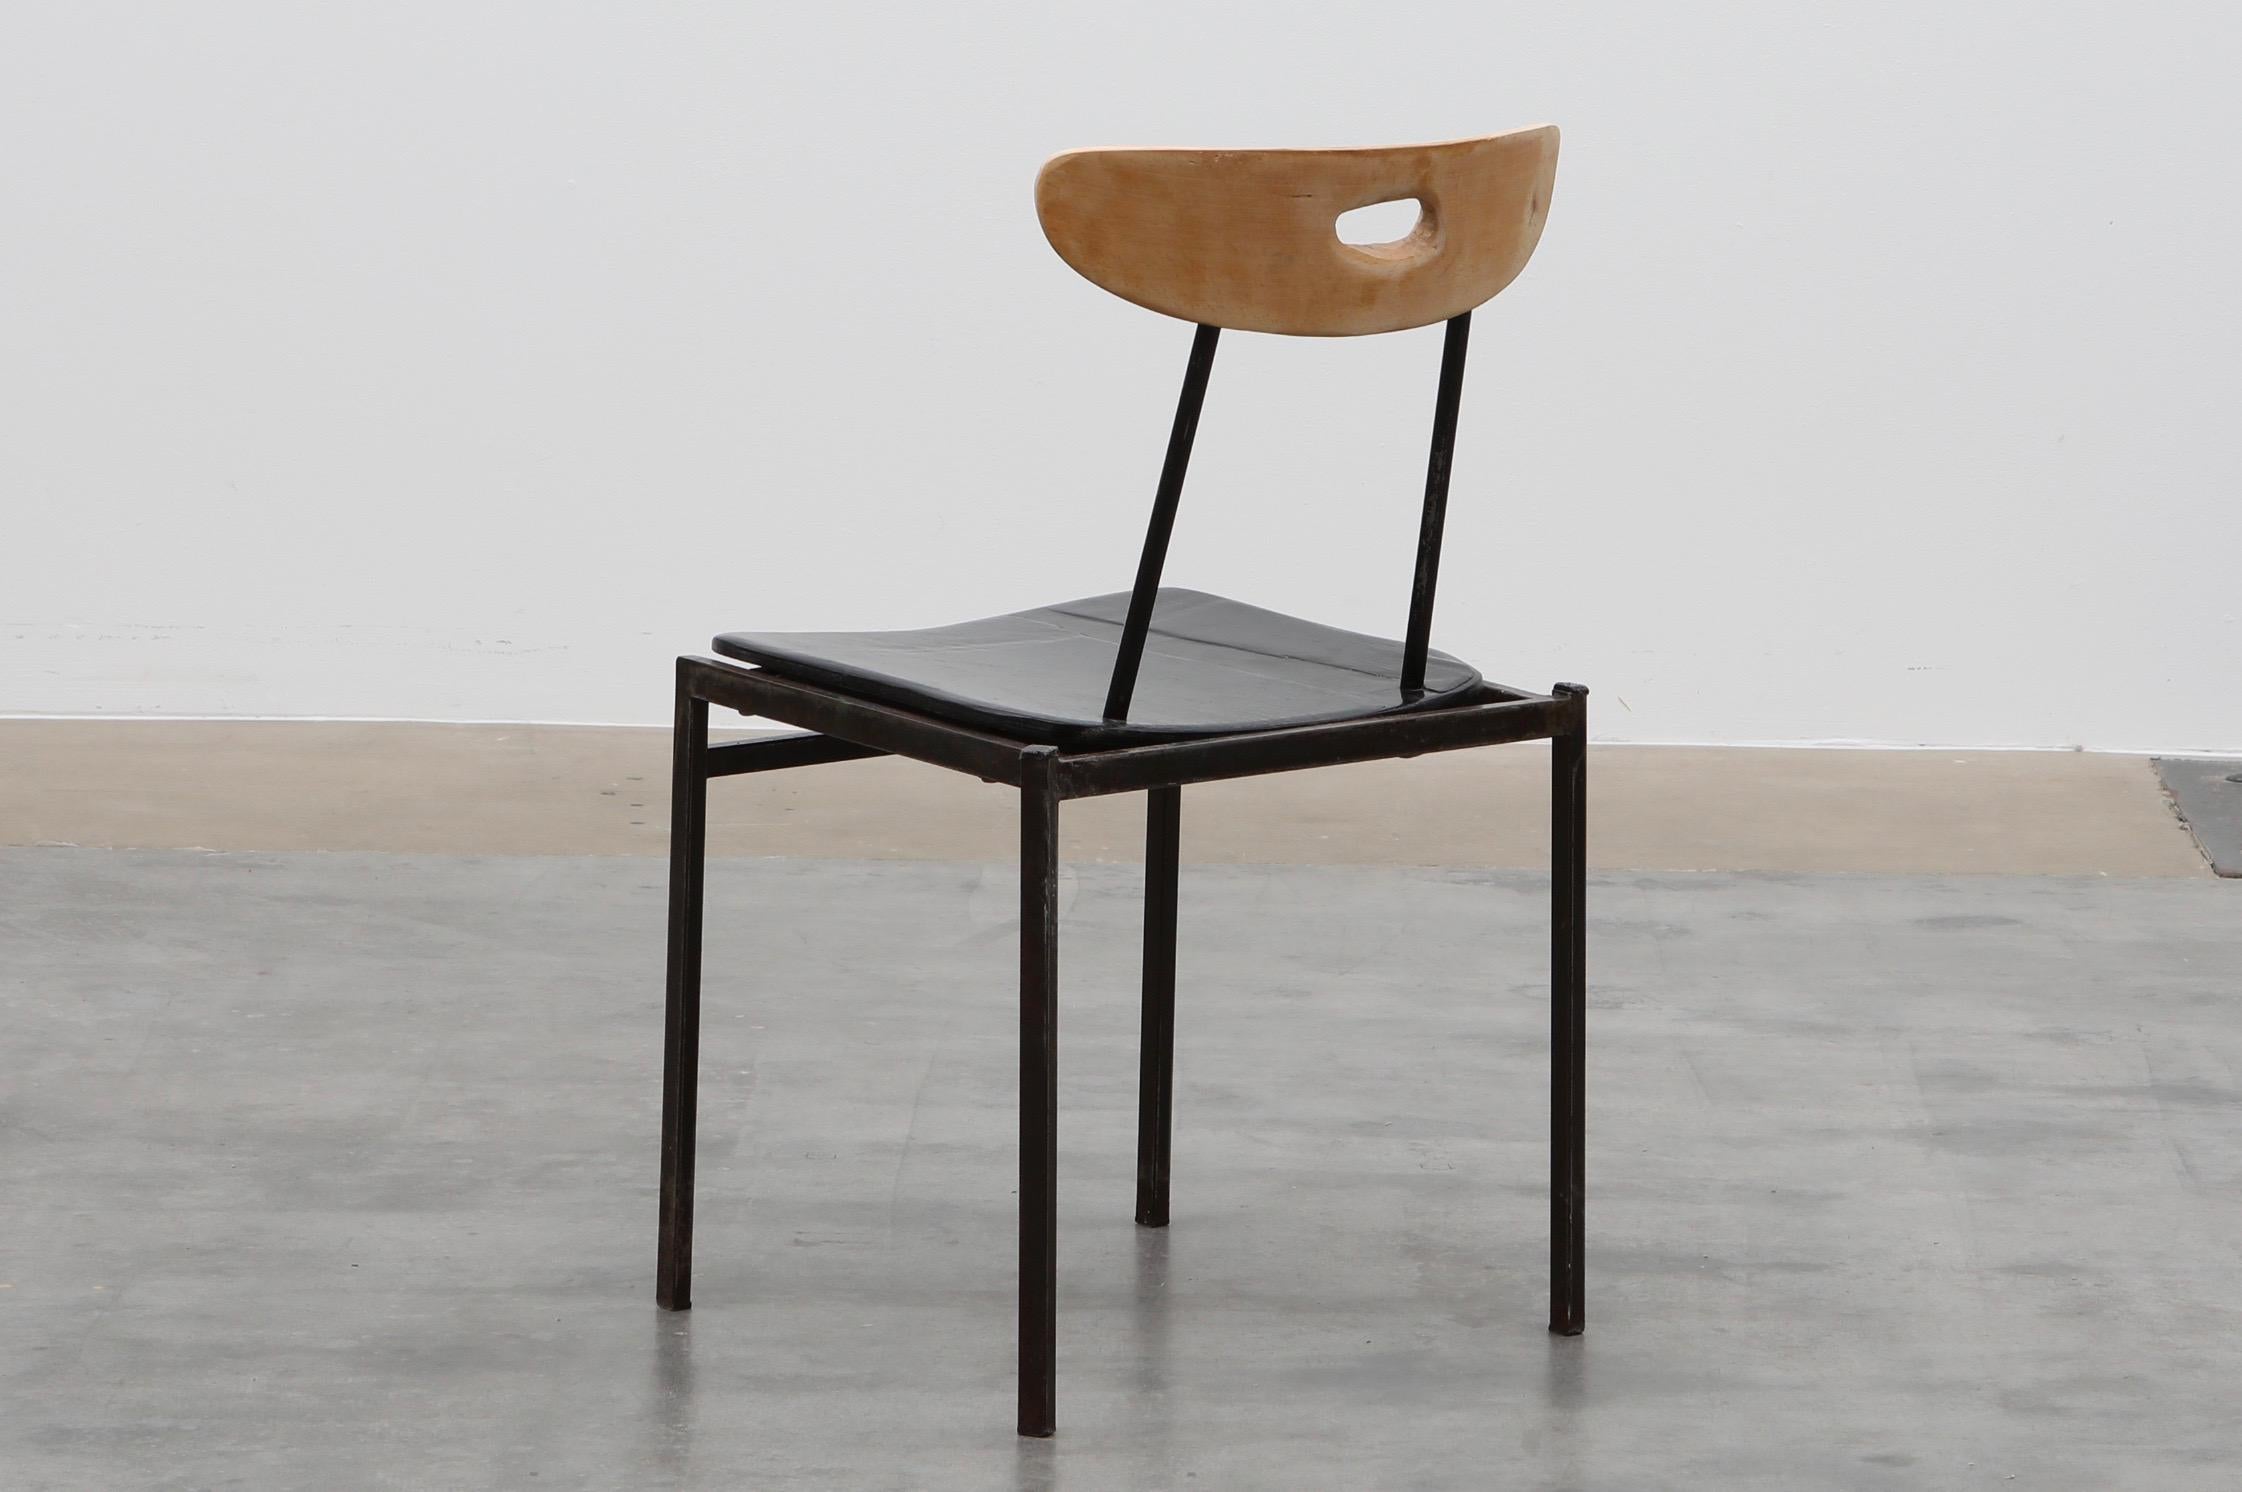 Solid side chair created 2019 by Atelier Staab. Combination of two midcentury pieces. Steel frame base with wooden seat/steel and wood backrest. Reshaped, cut, painted black and multi lacquered in high gloss 2k varnish. Martino Gampers work 100